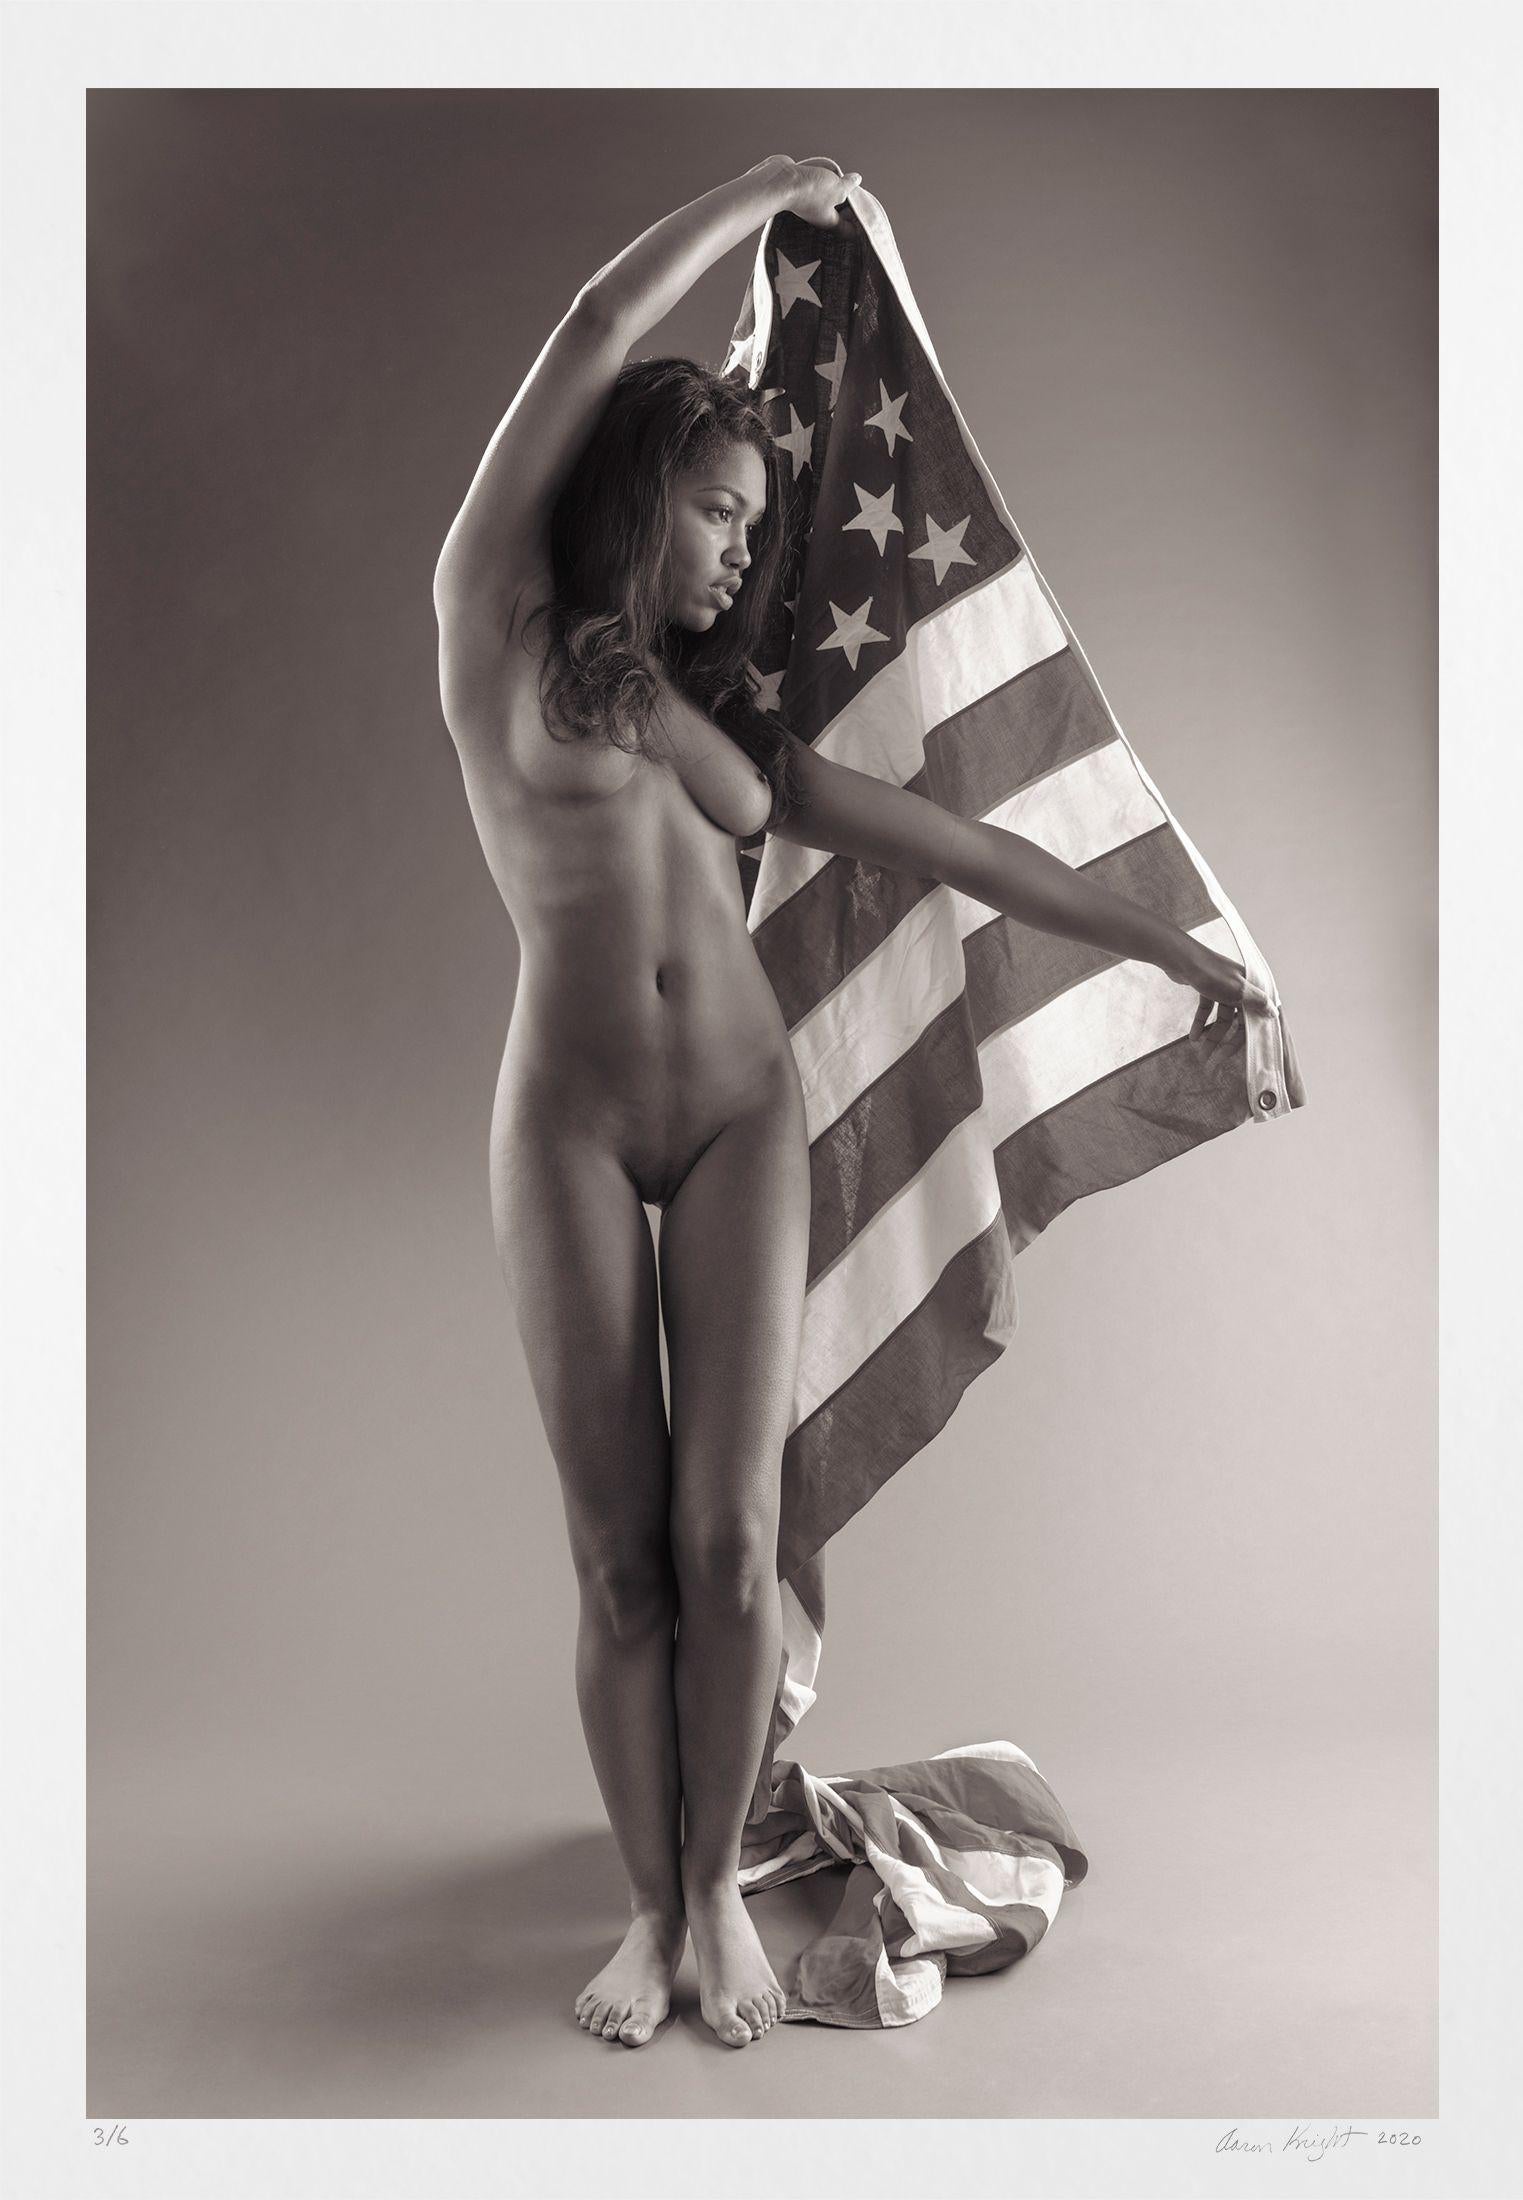 Aaron Knight Black and White Photograph - Stars, Stripes, Black and White, Photograph, Archival Ink Jet